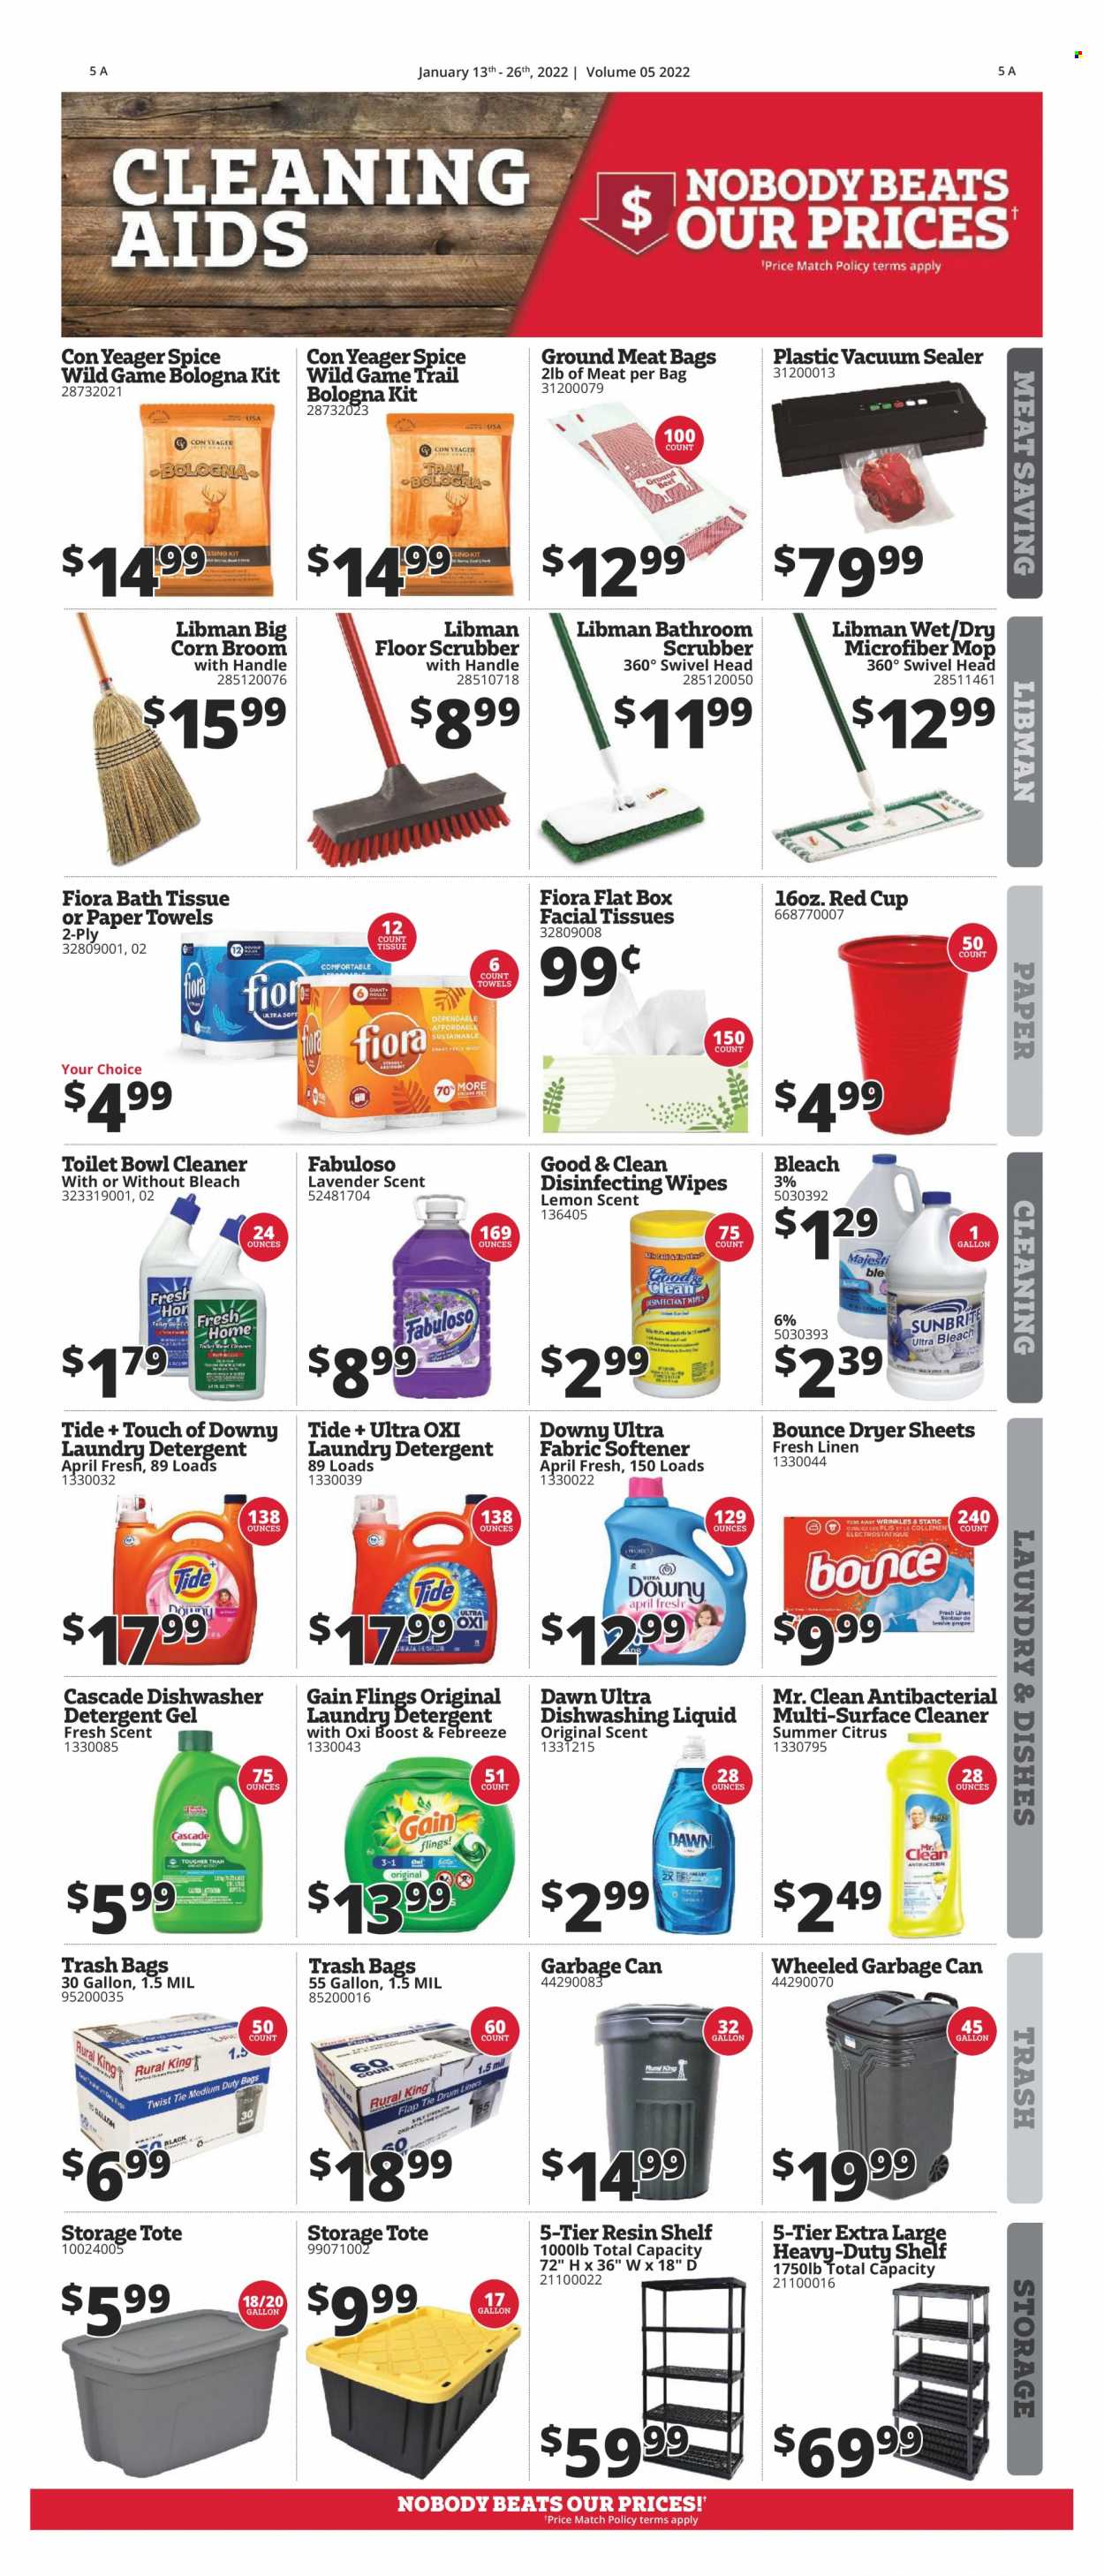 thumbnail - Rural King Flyer - 01/13/2022 - 01/26/2022 - Sales products - corn, spice, Boost, Cascade, Gain, Tide, fabric softener, bleach, laundry detergent, Bounce, washing gel, Fabuloso, dryer sheets, Downy Laundry, trash bags, vacuum sealer, gallon, mop, broom, cup, kitchen towels, linens, storage tote, cleaner. Page 6.